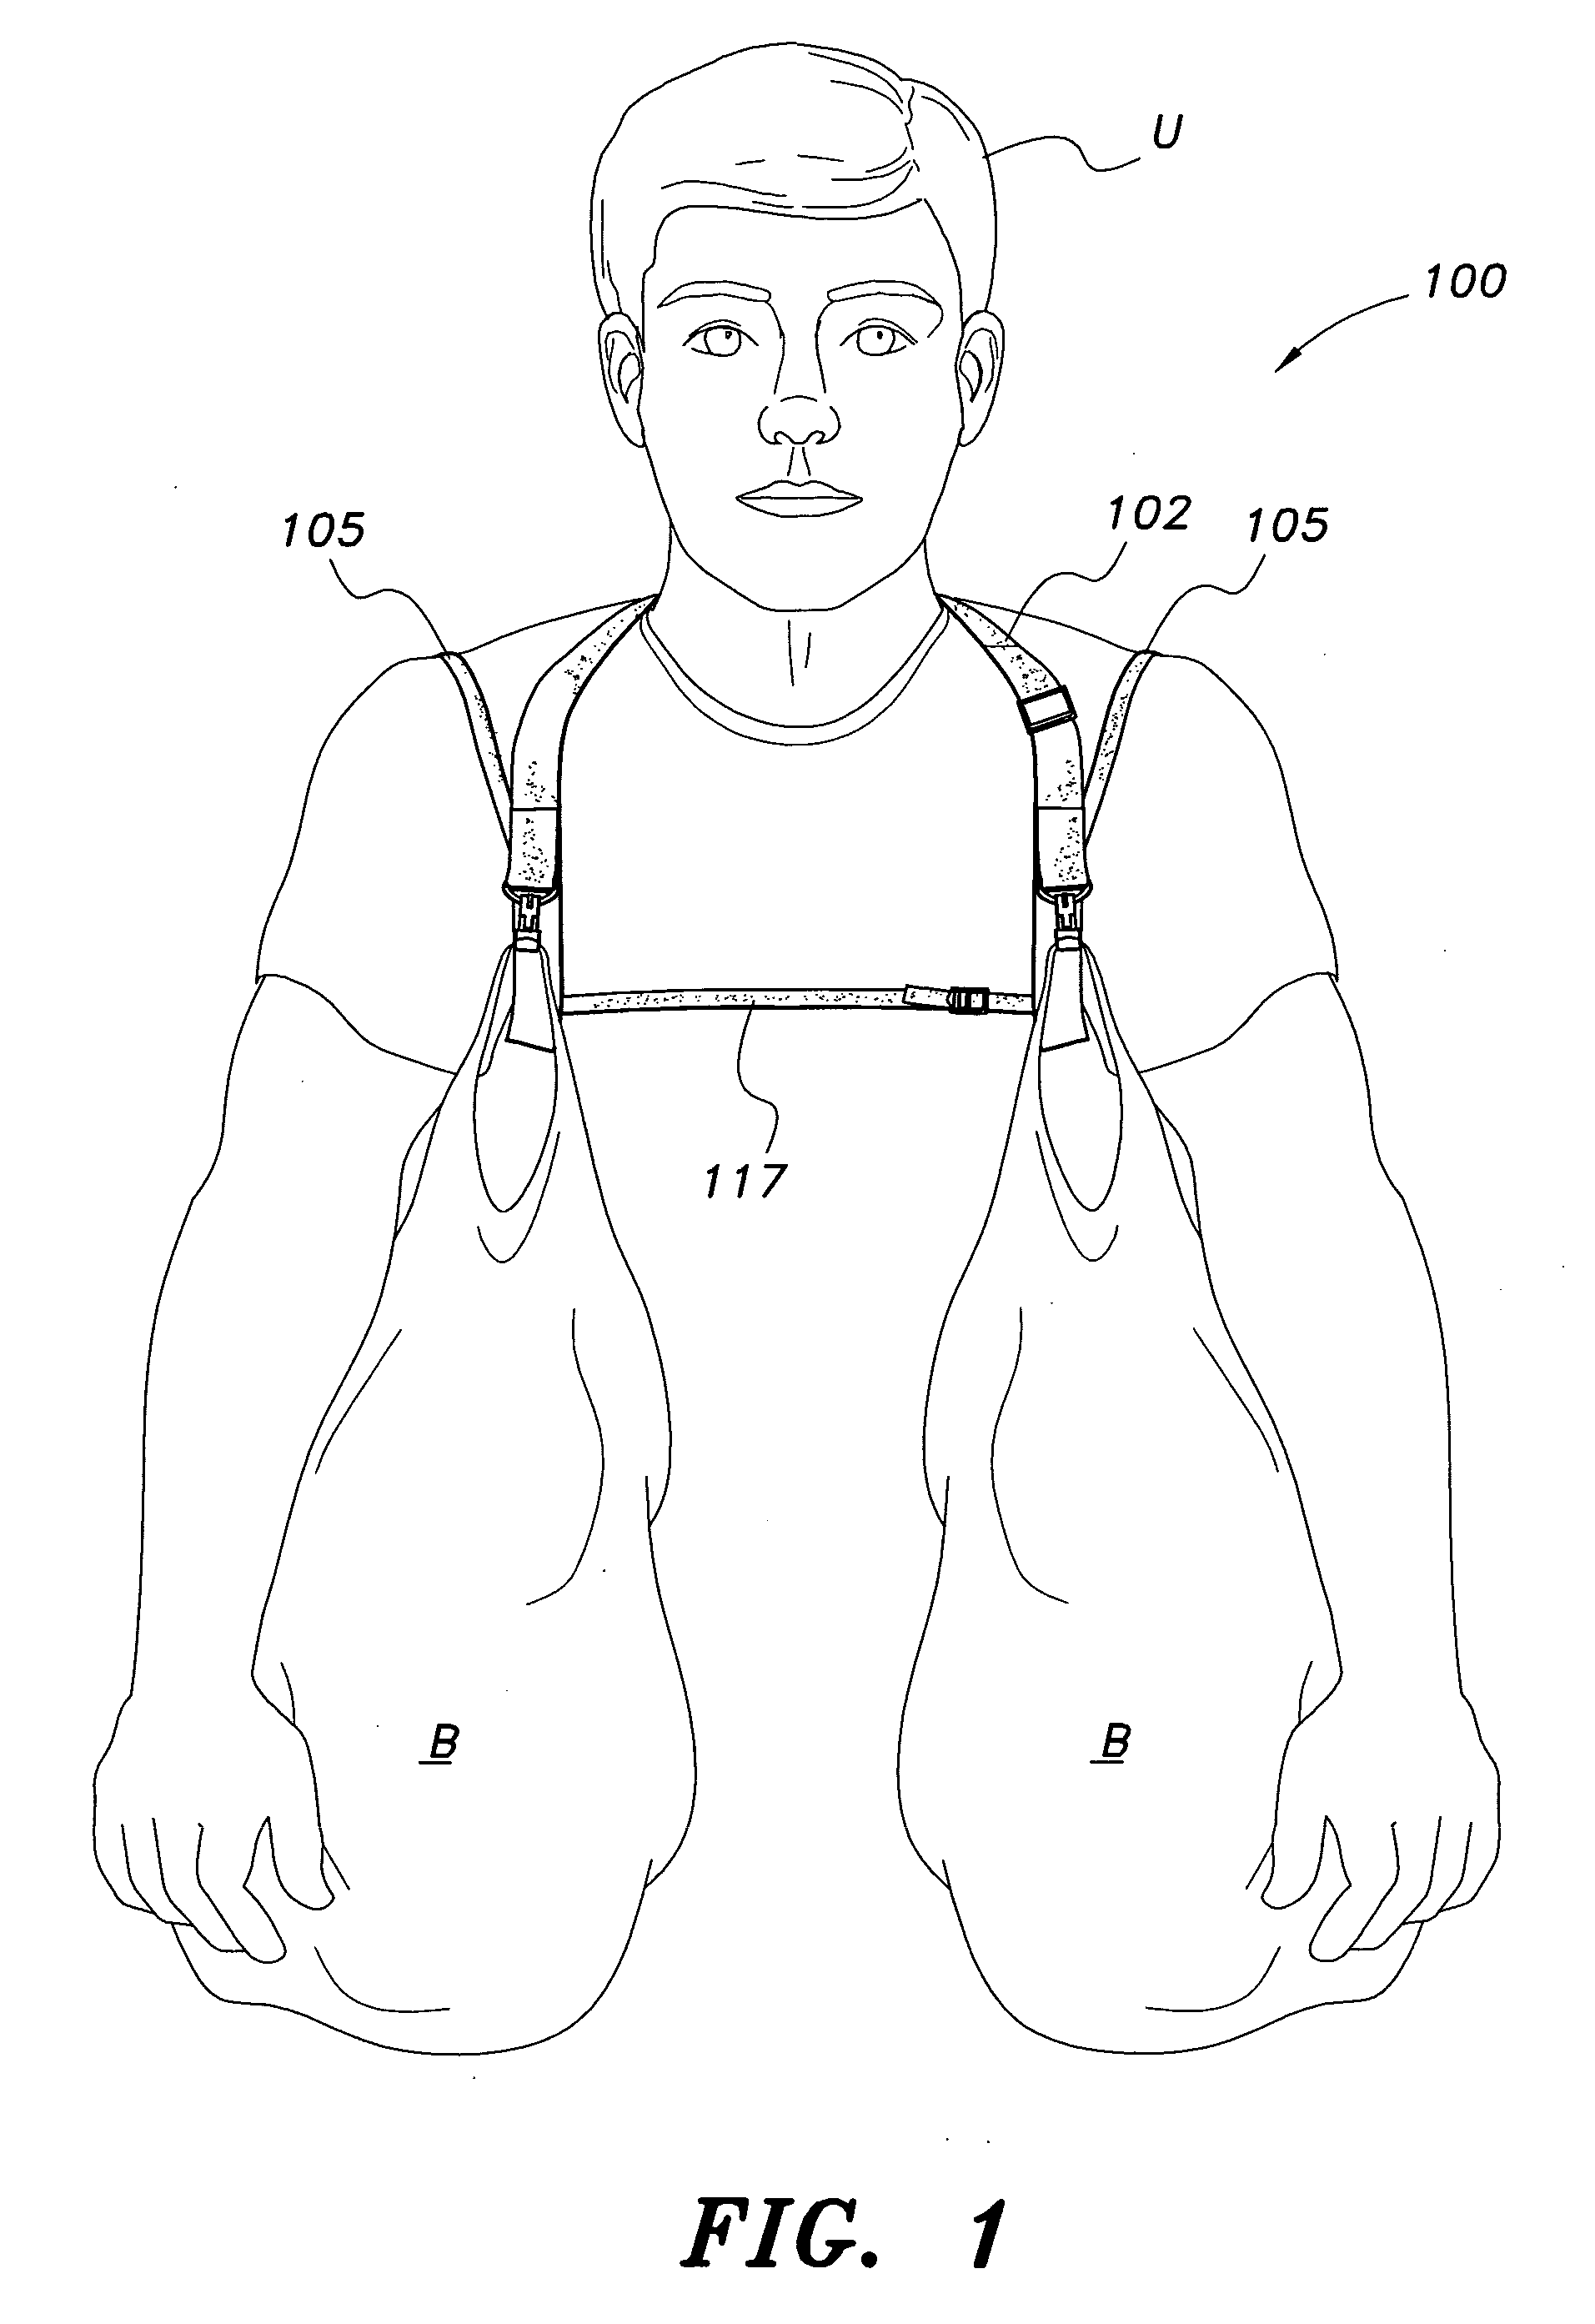 Bag carrying harness